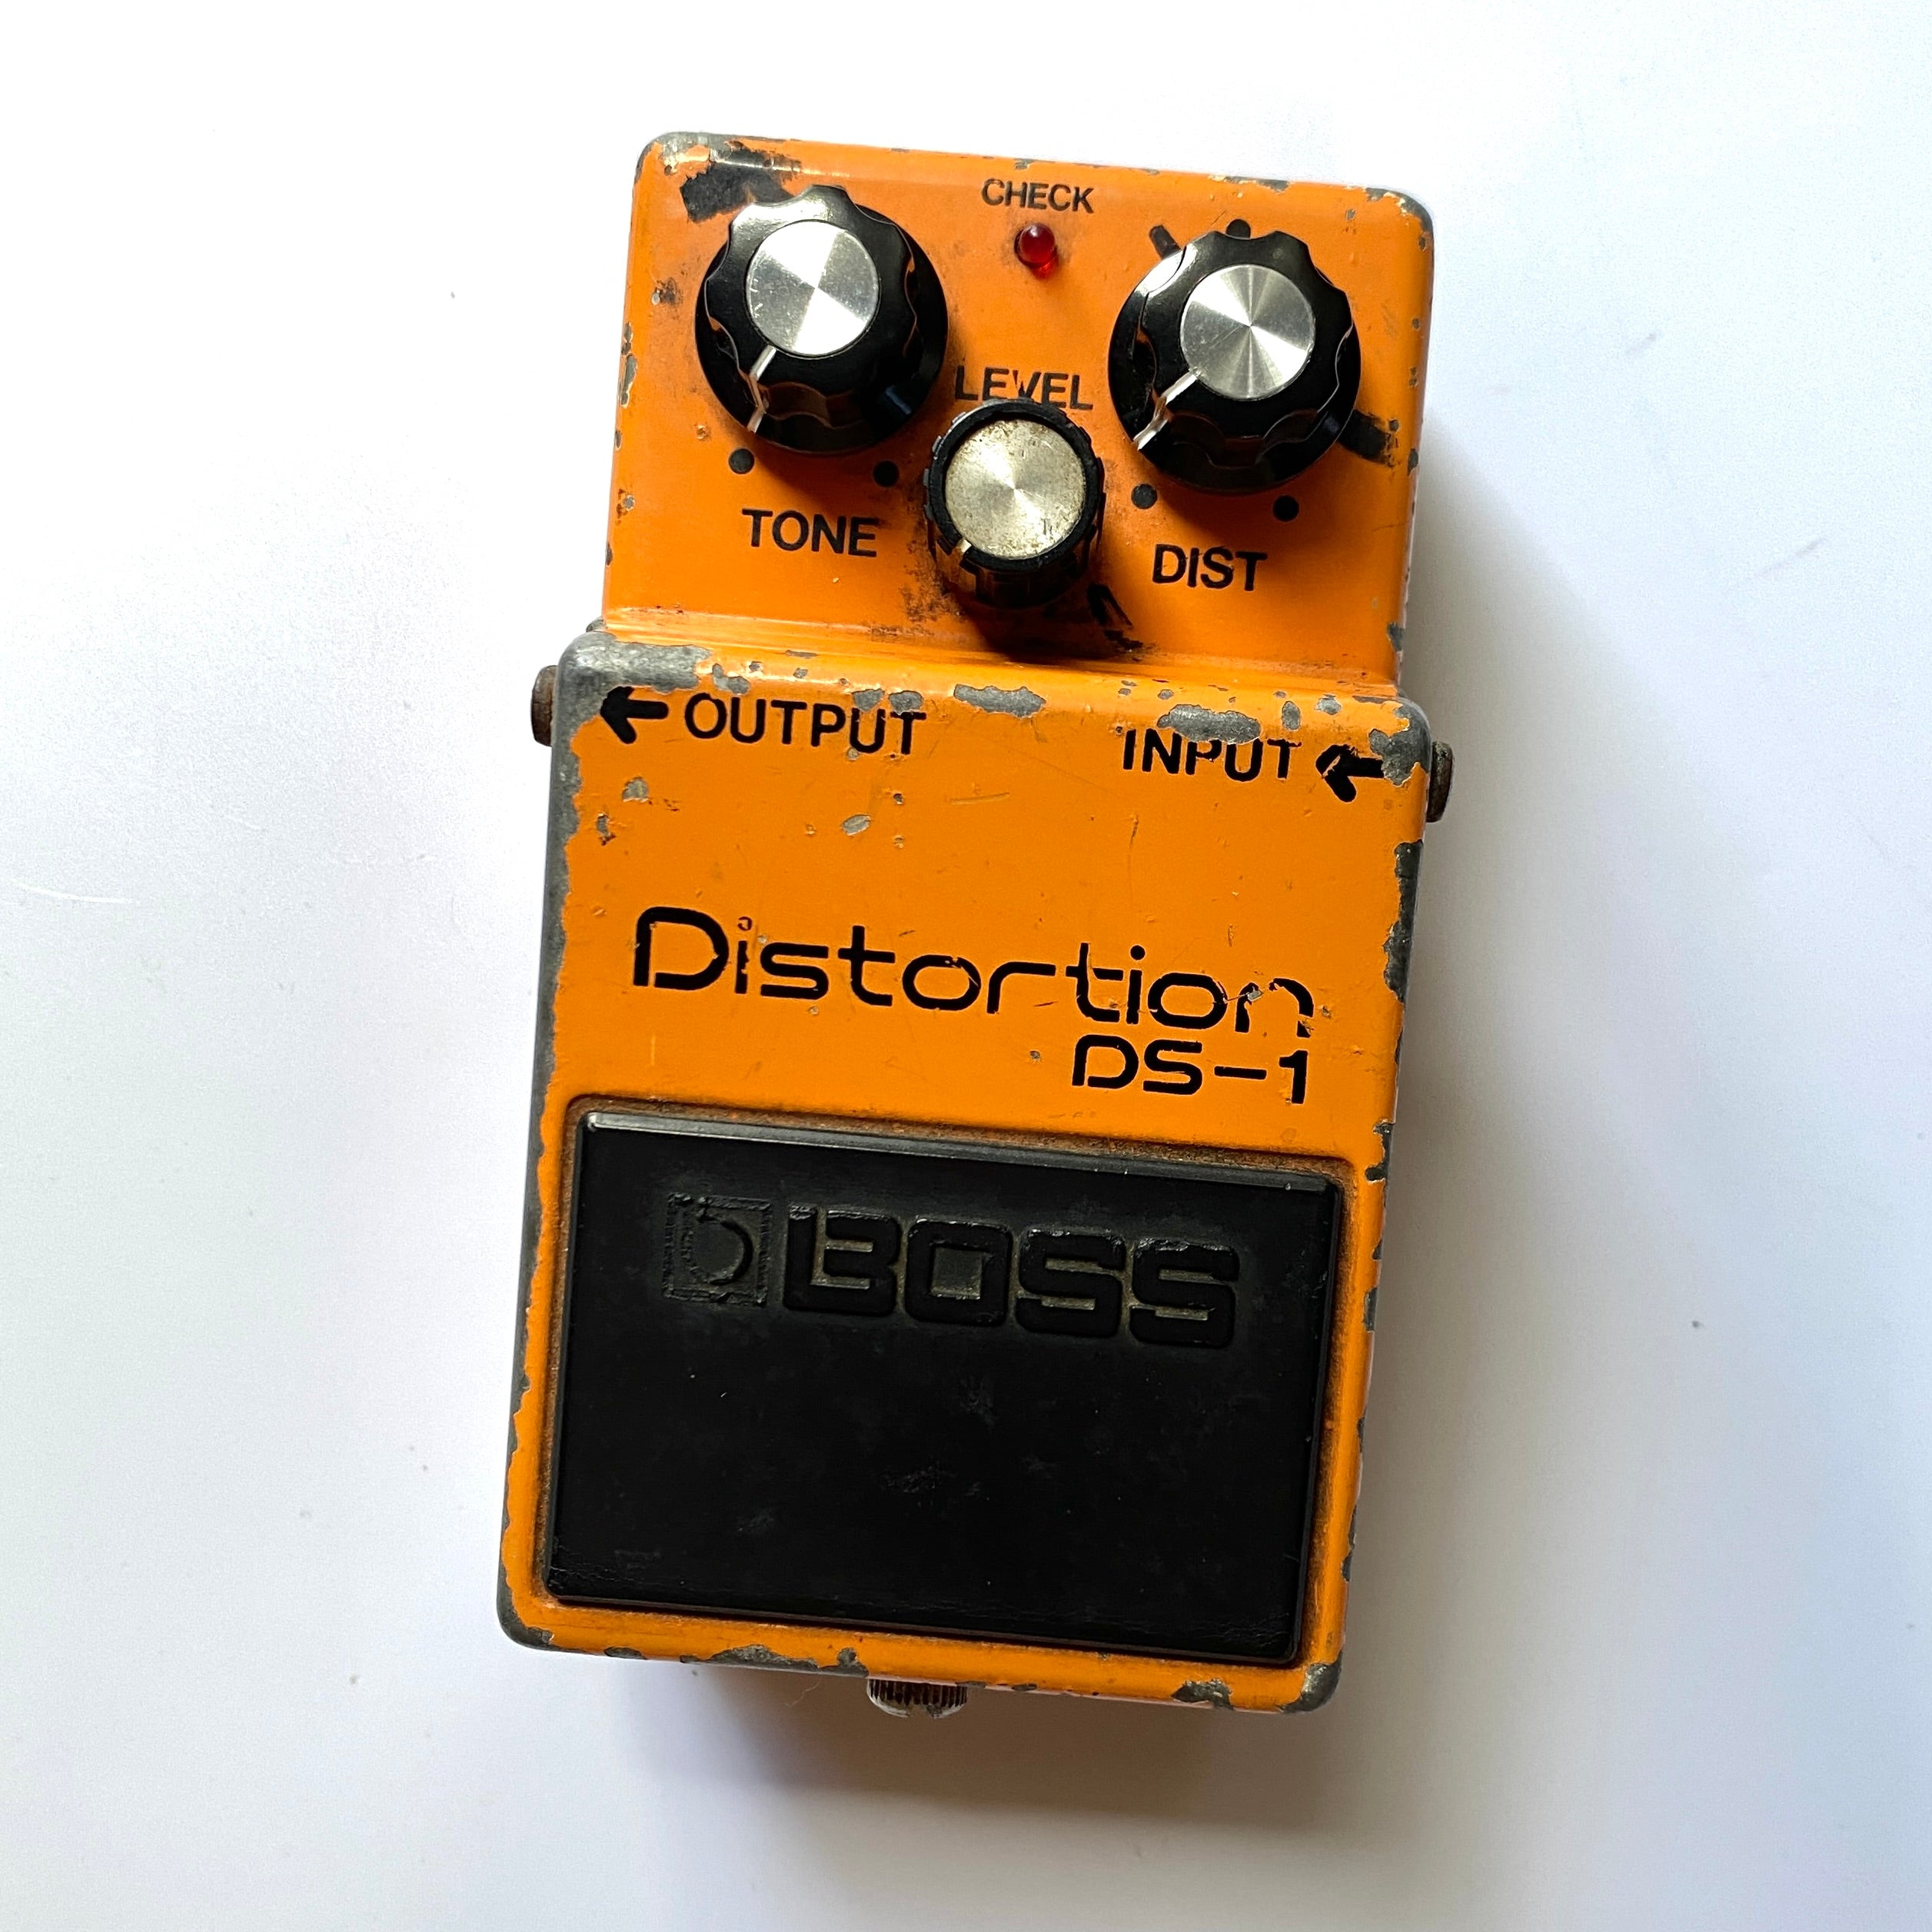 BOSS DISTORTION DS-1 made in Japan